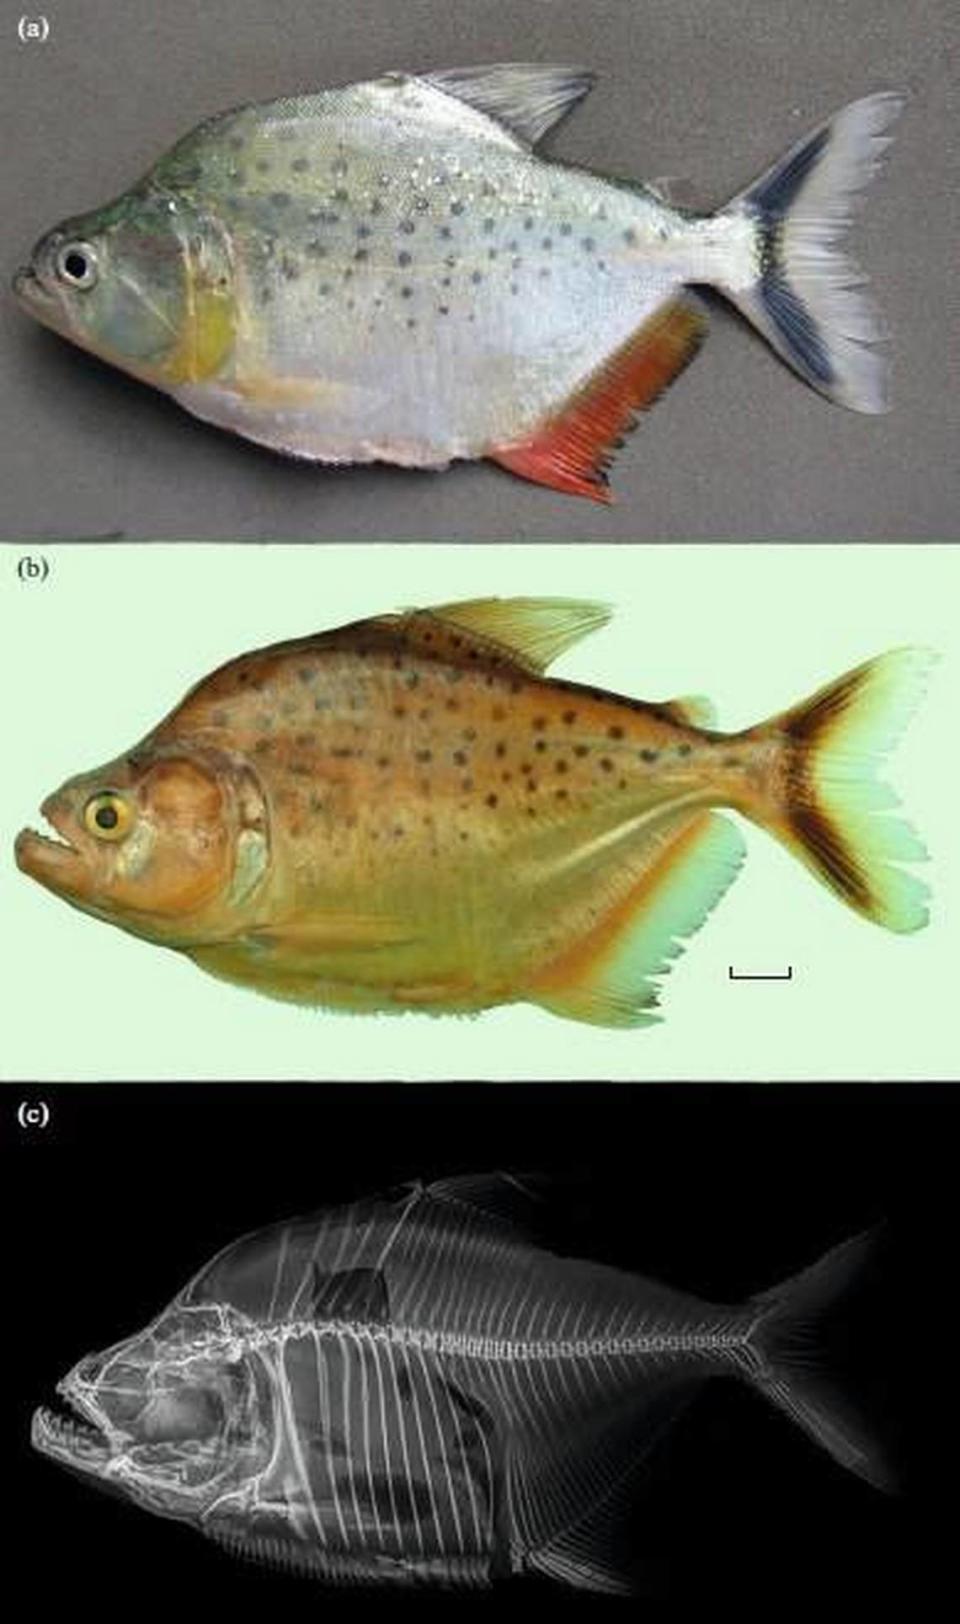 In life, the fish had darker fins than previously thought of piranhas, the researchers said.